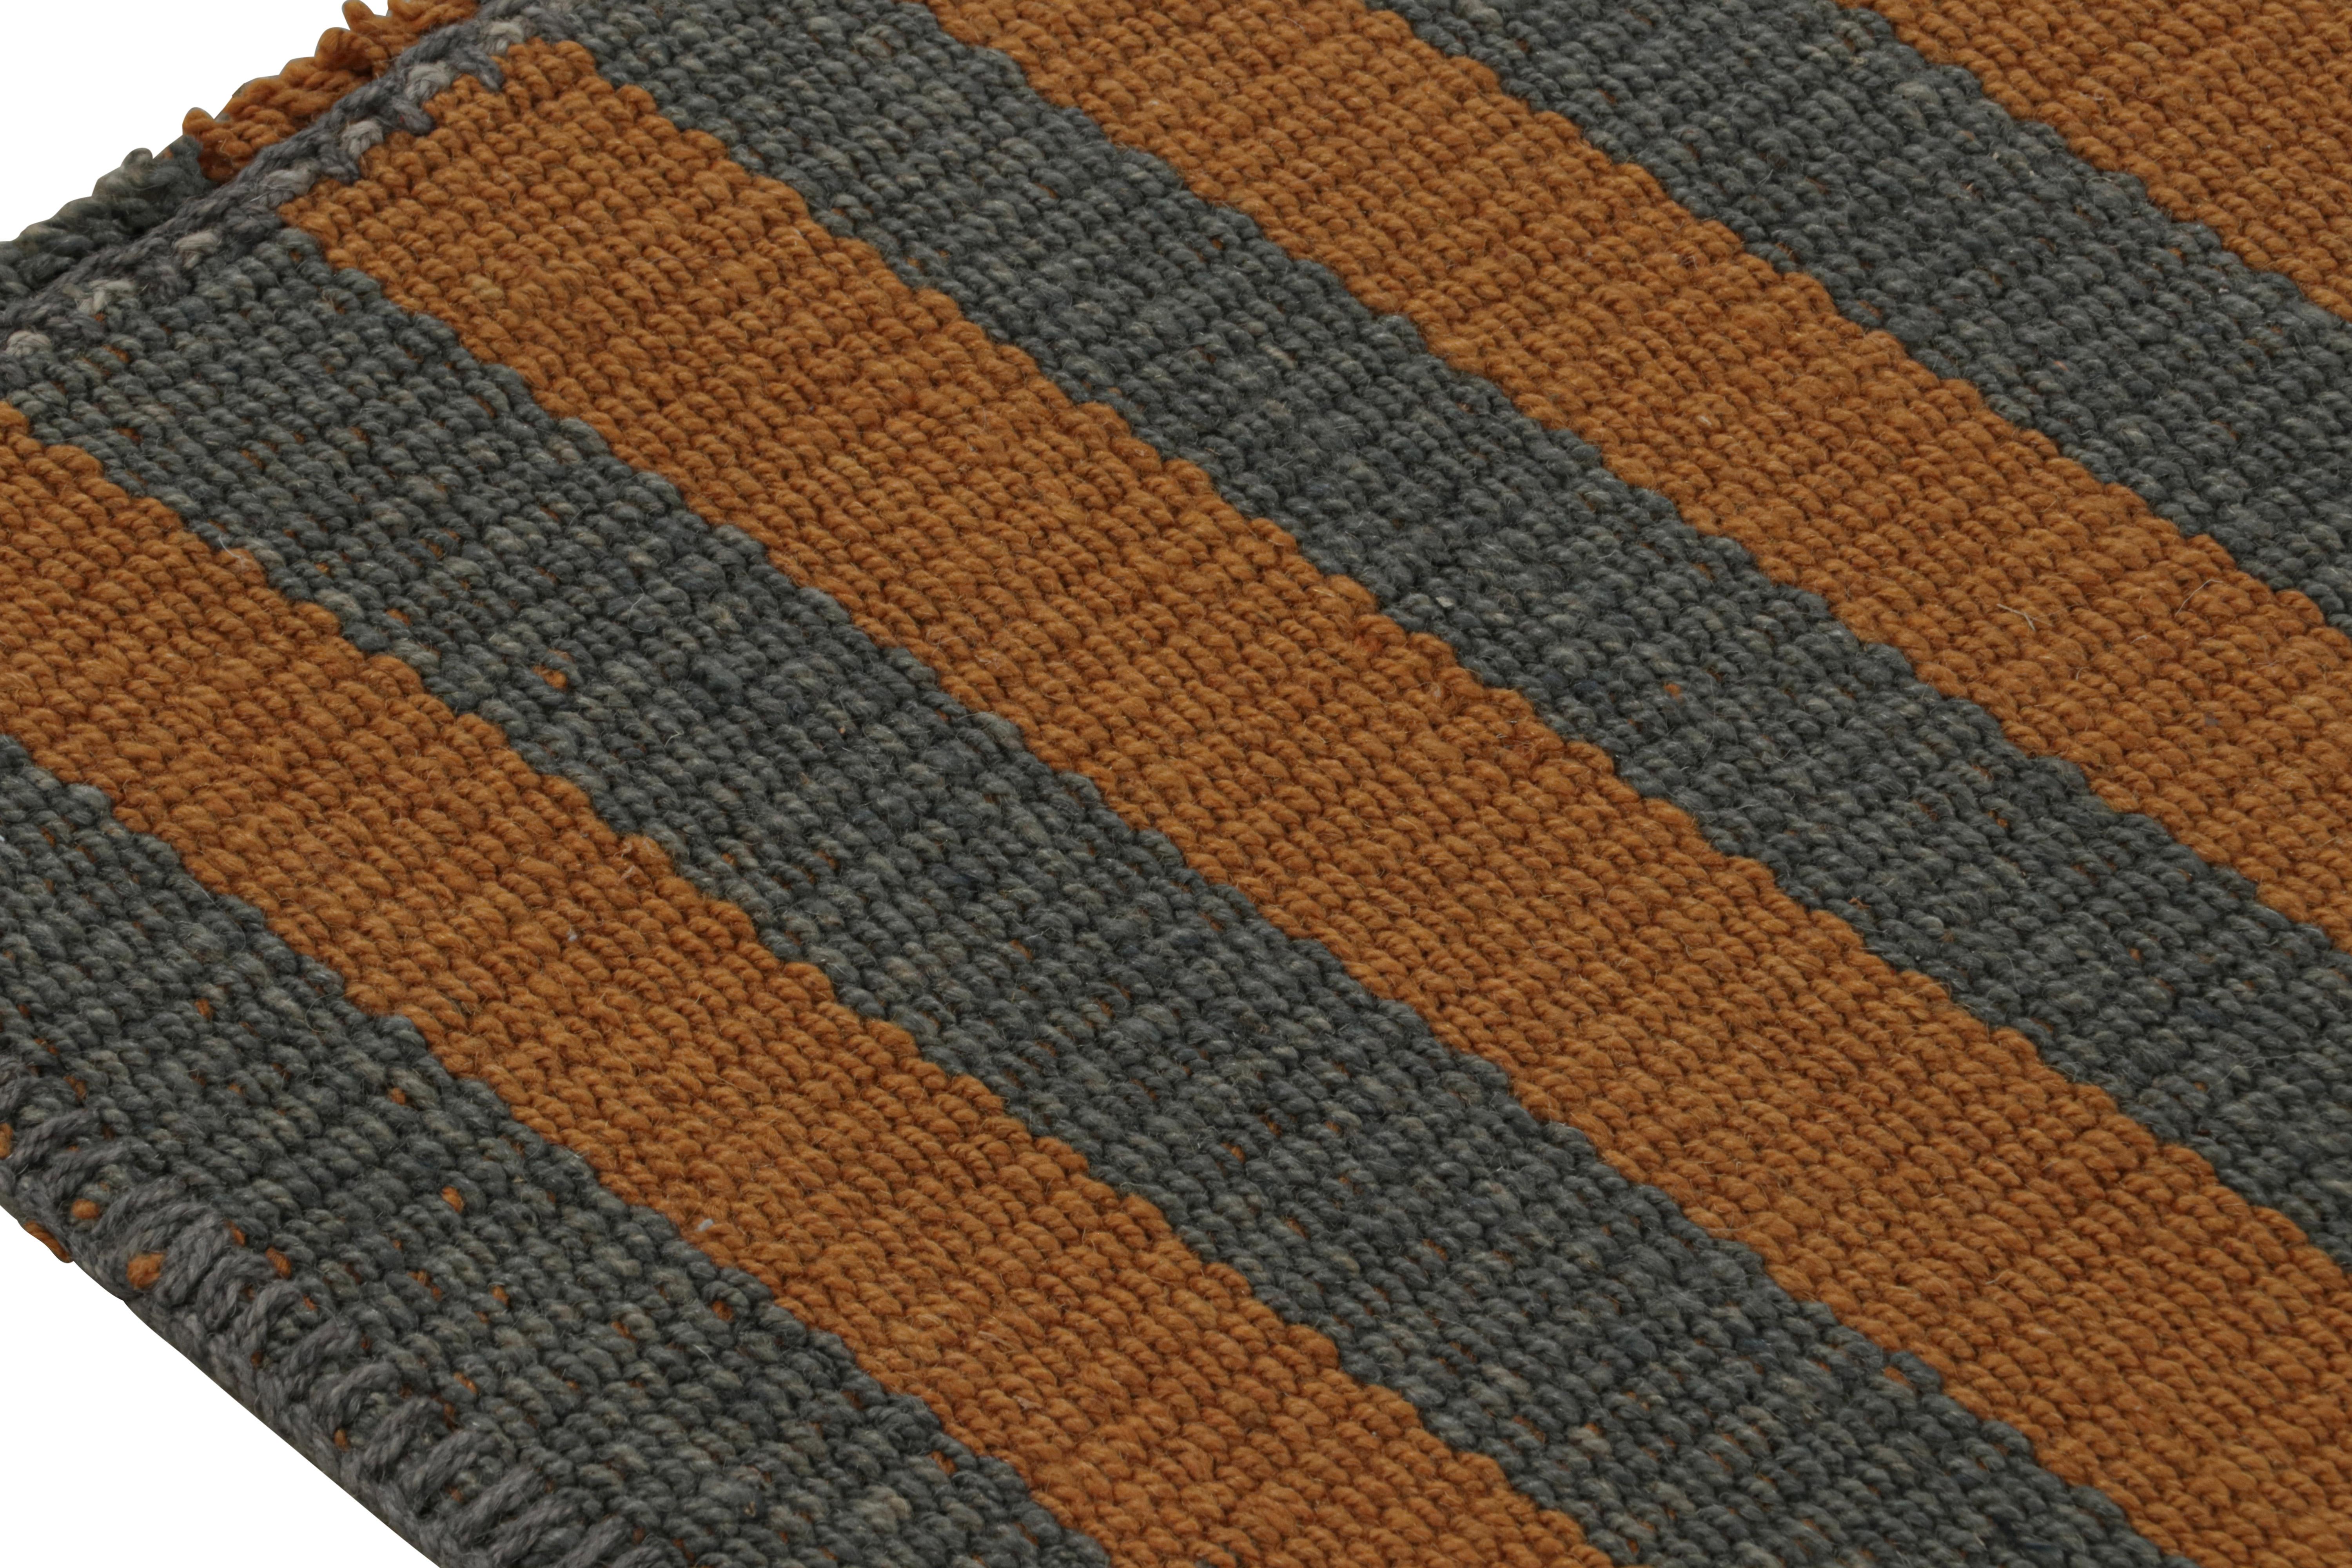 Hand-Woven Rug & Kilim’s Contemporary Kilim Scatter Rug, In Orange And Blue Stripes For Sale